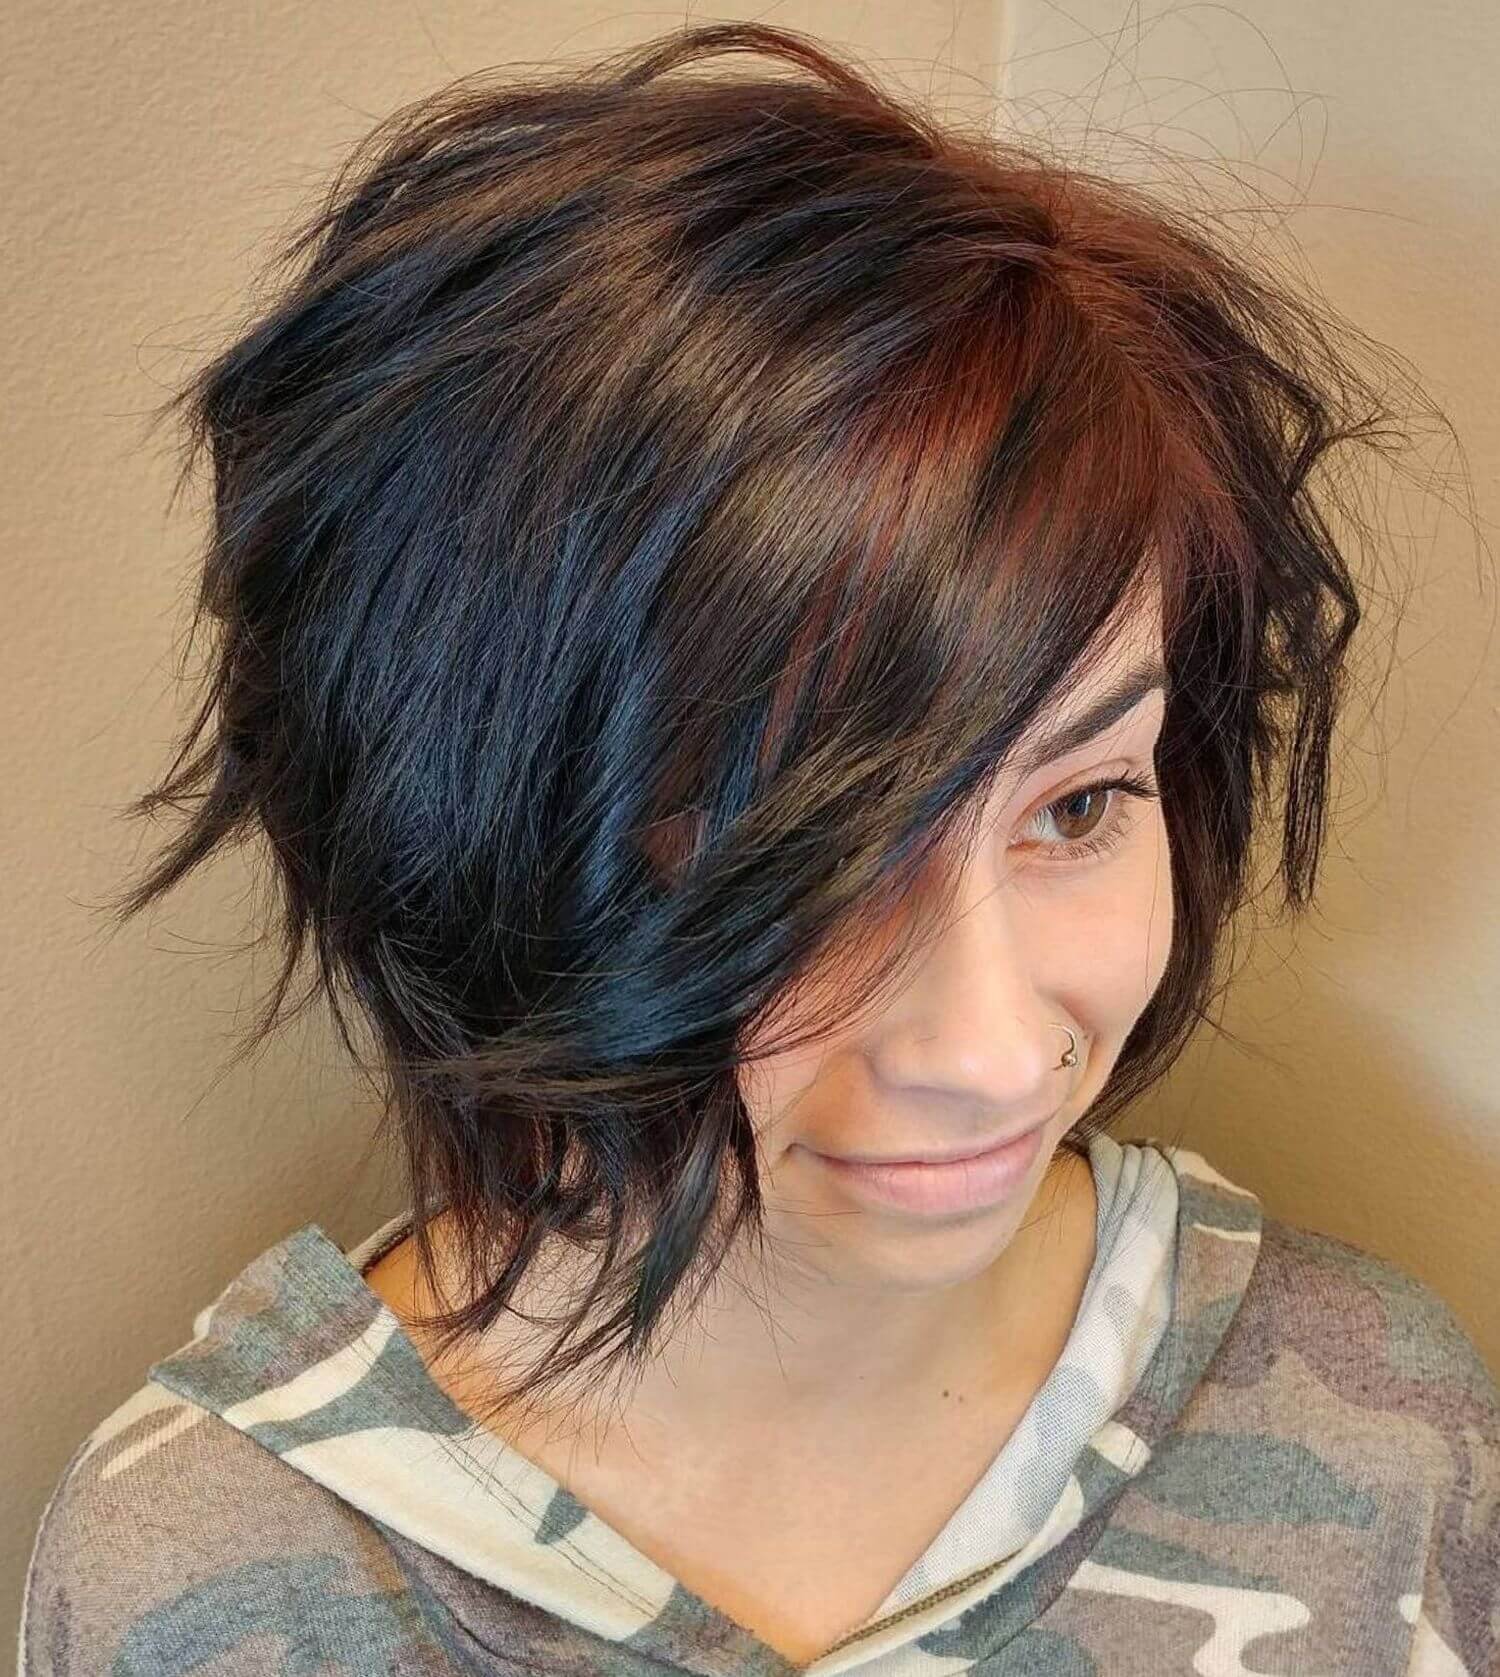 Asymmetrical hairstyle with a unique and edgy flair, showcasing creativity and individuality